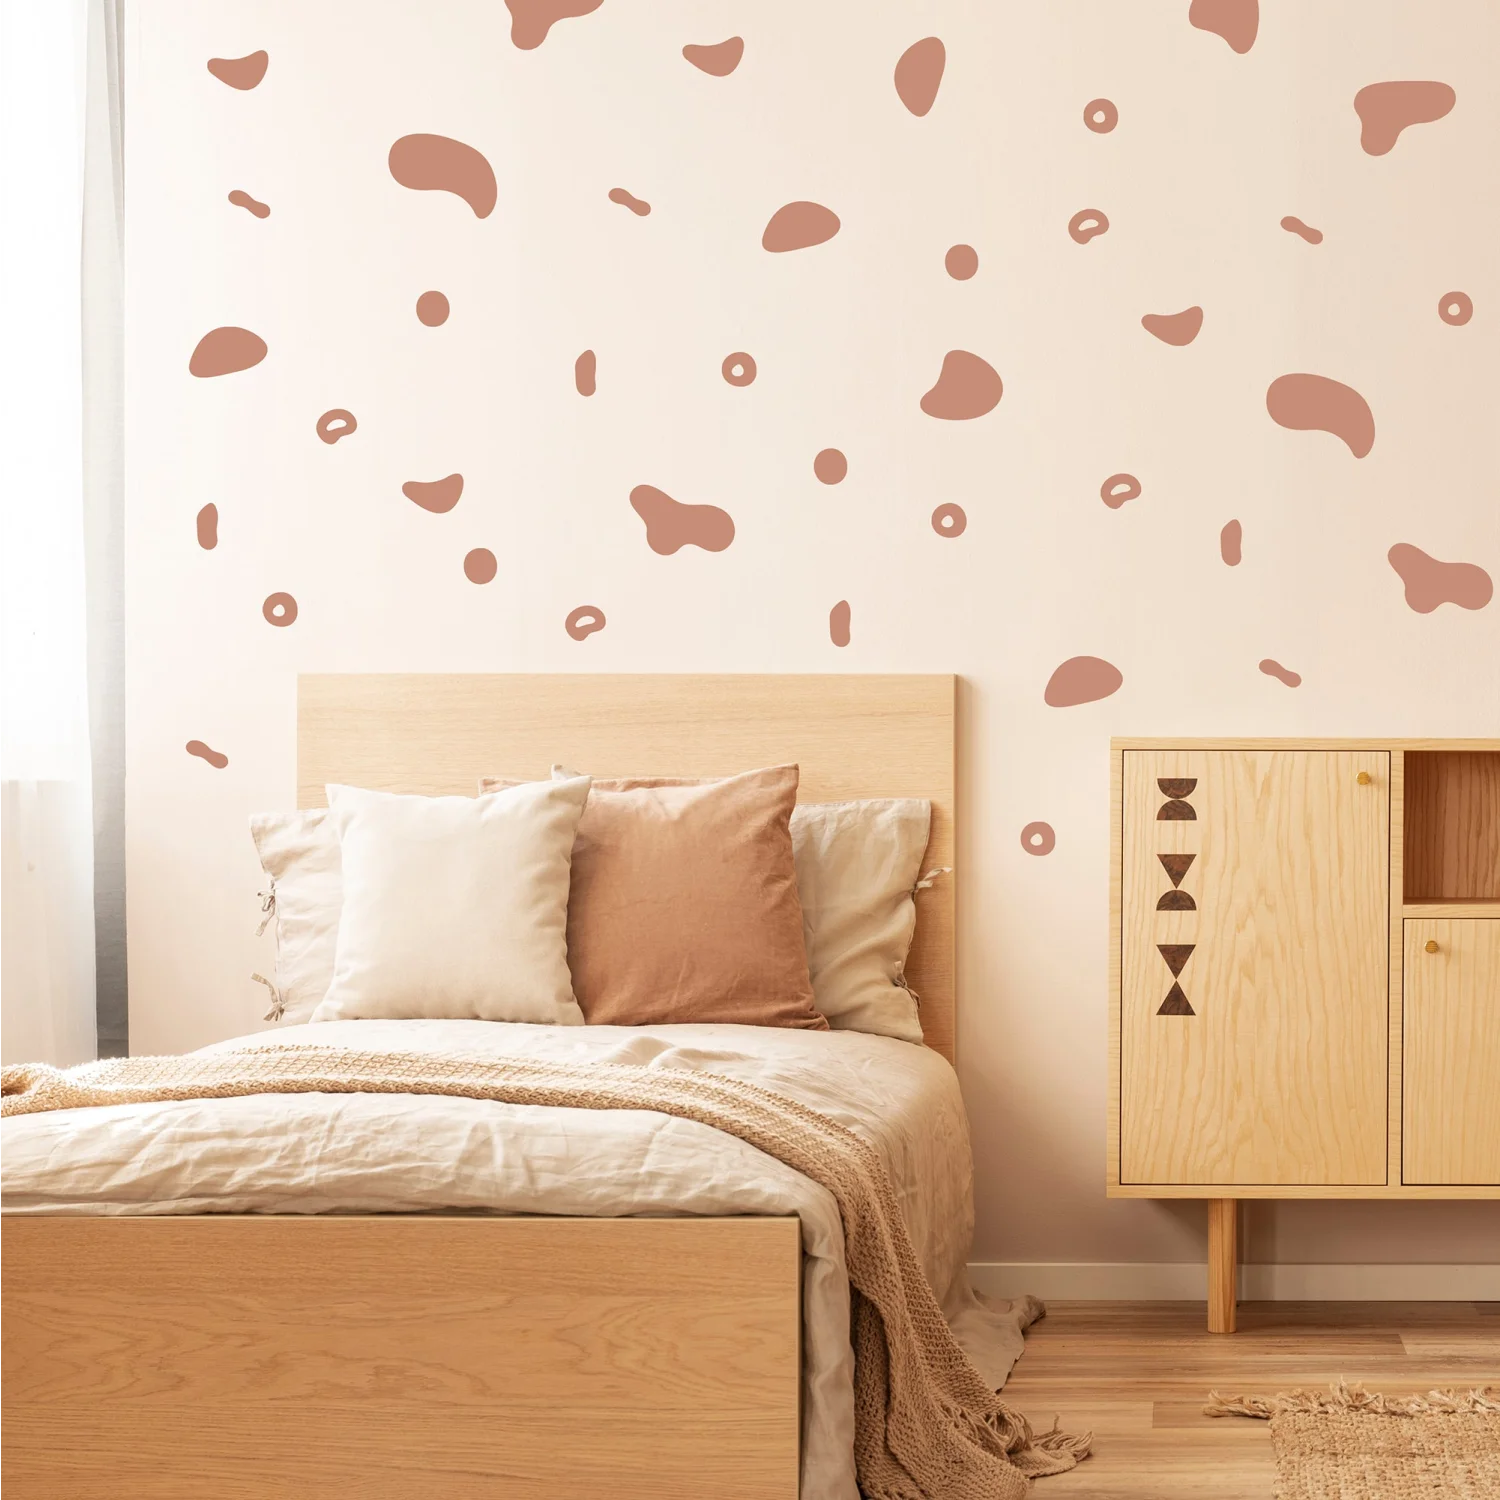 Organic Shapes Neutral Wall Decal - Decals Abstract